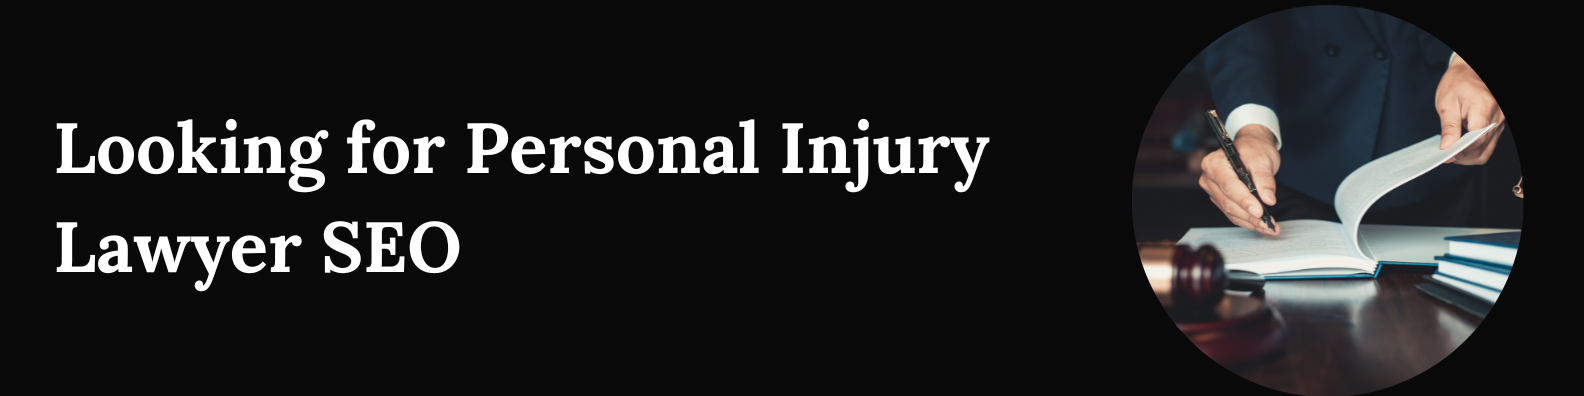 Looking for Personal Injury Lawyer SEO